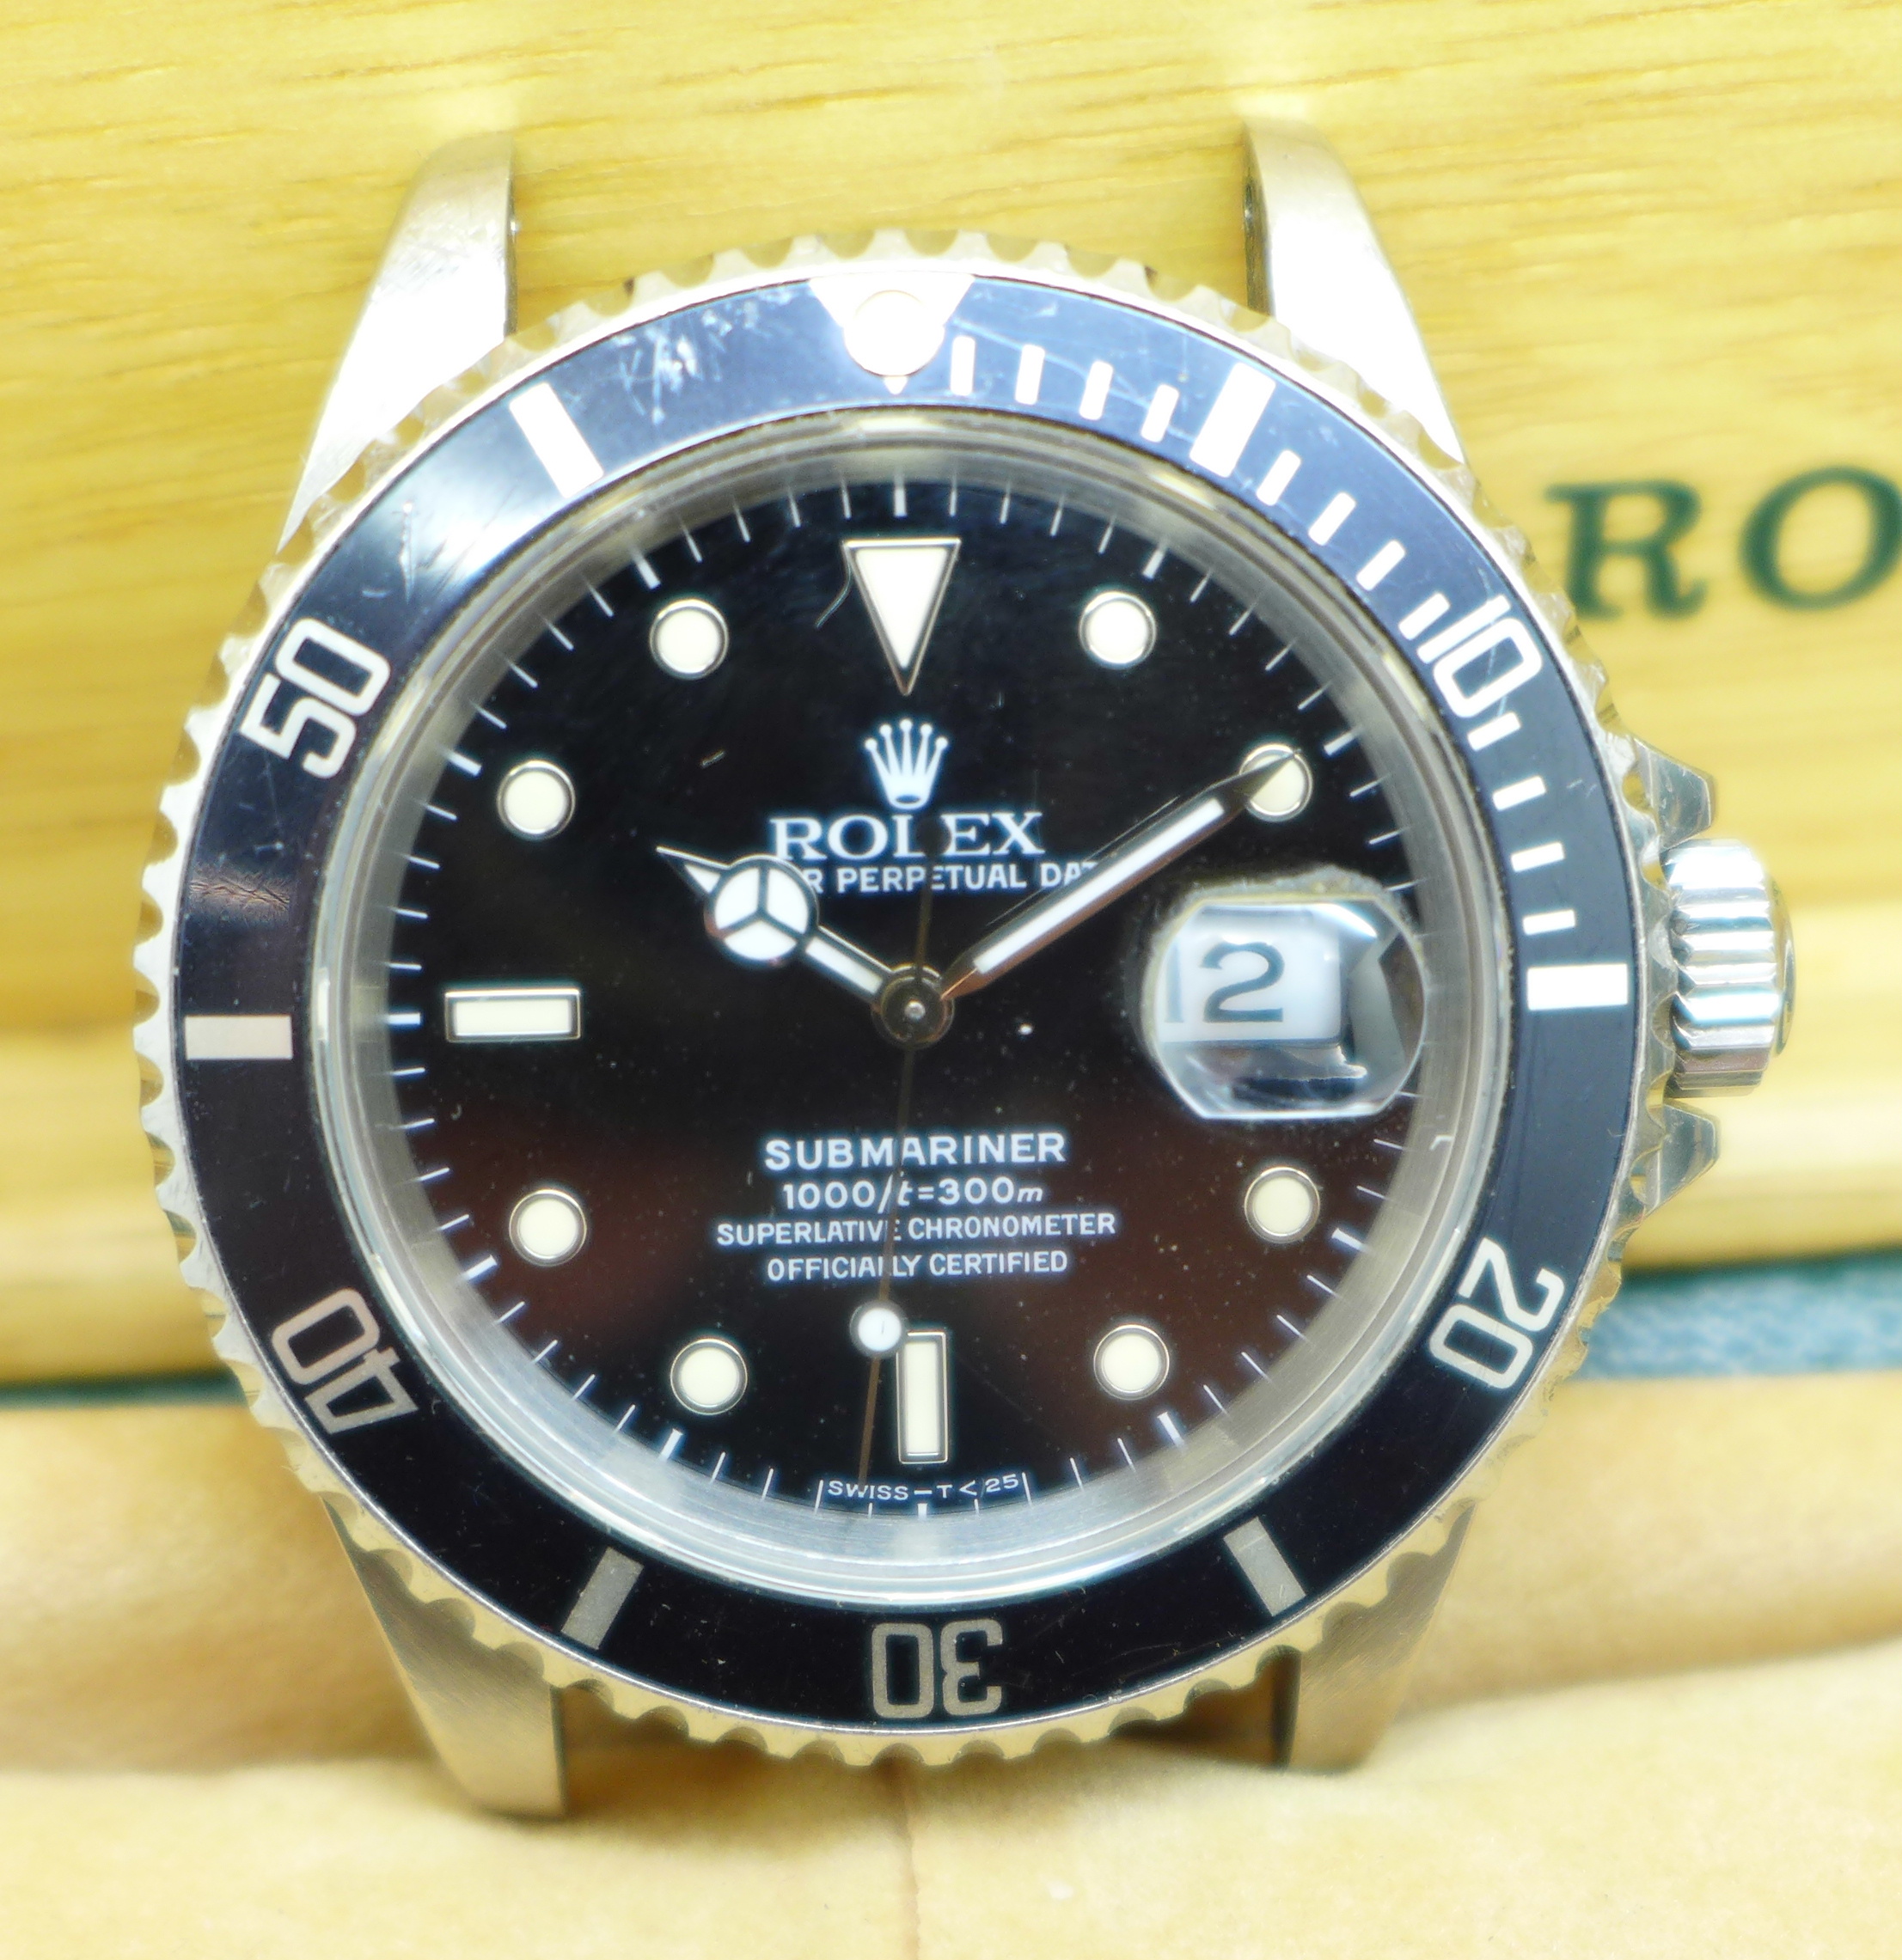 A Rolex Submariner Superlative Chronometer Date wristwatch, 1000ft=300m, ref. 16610, serial number - Image 2 of 18